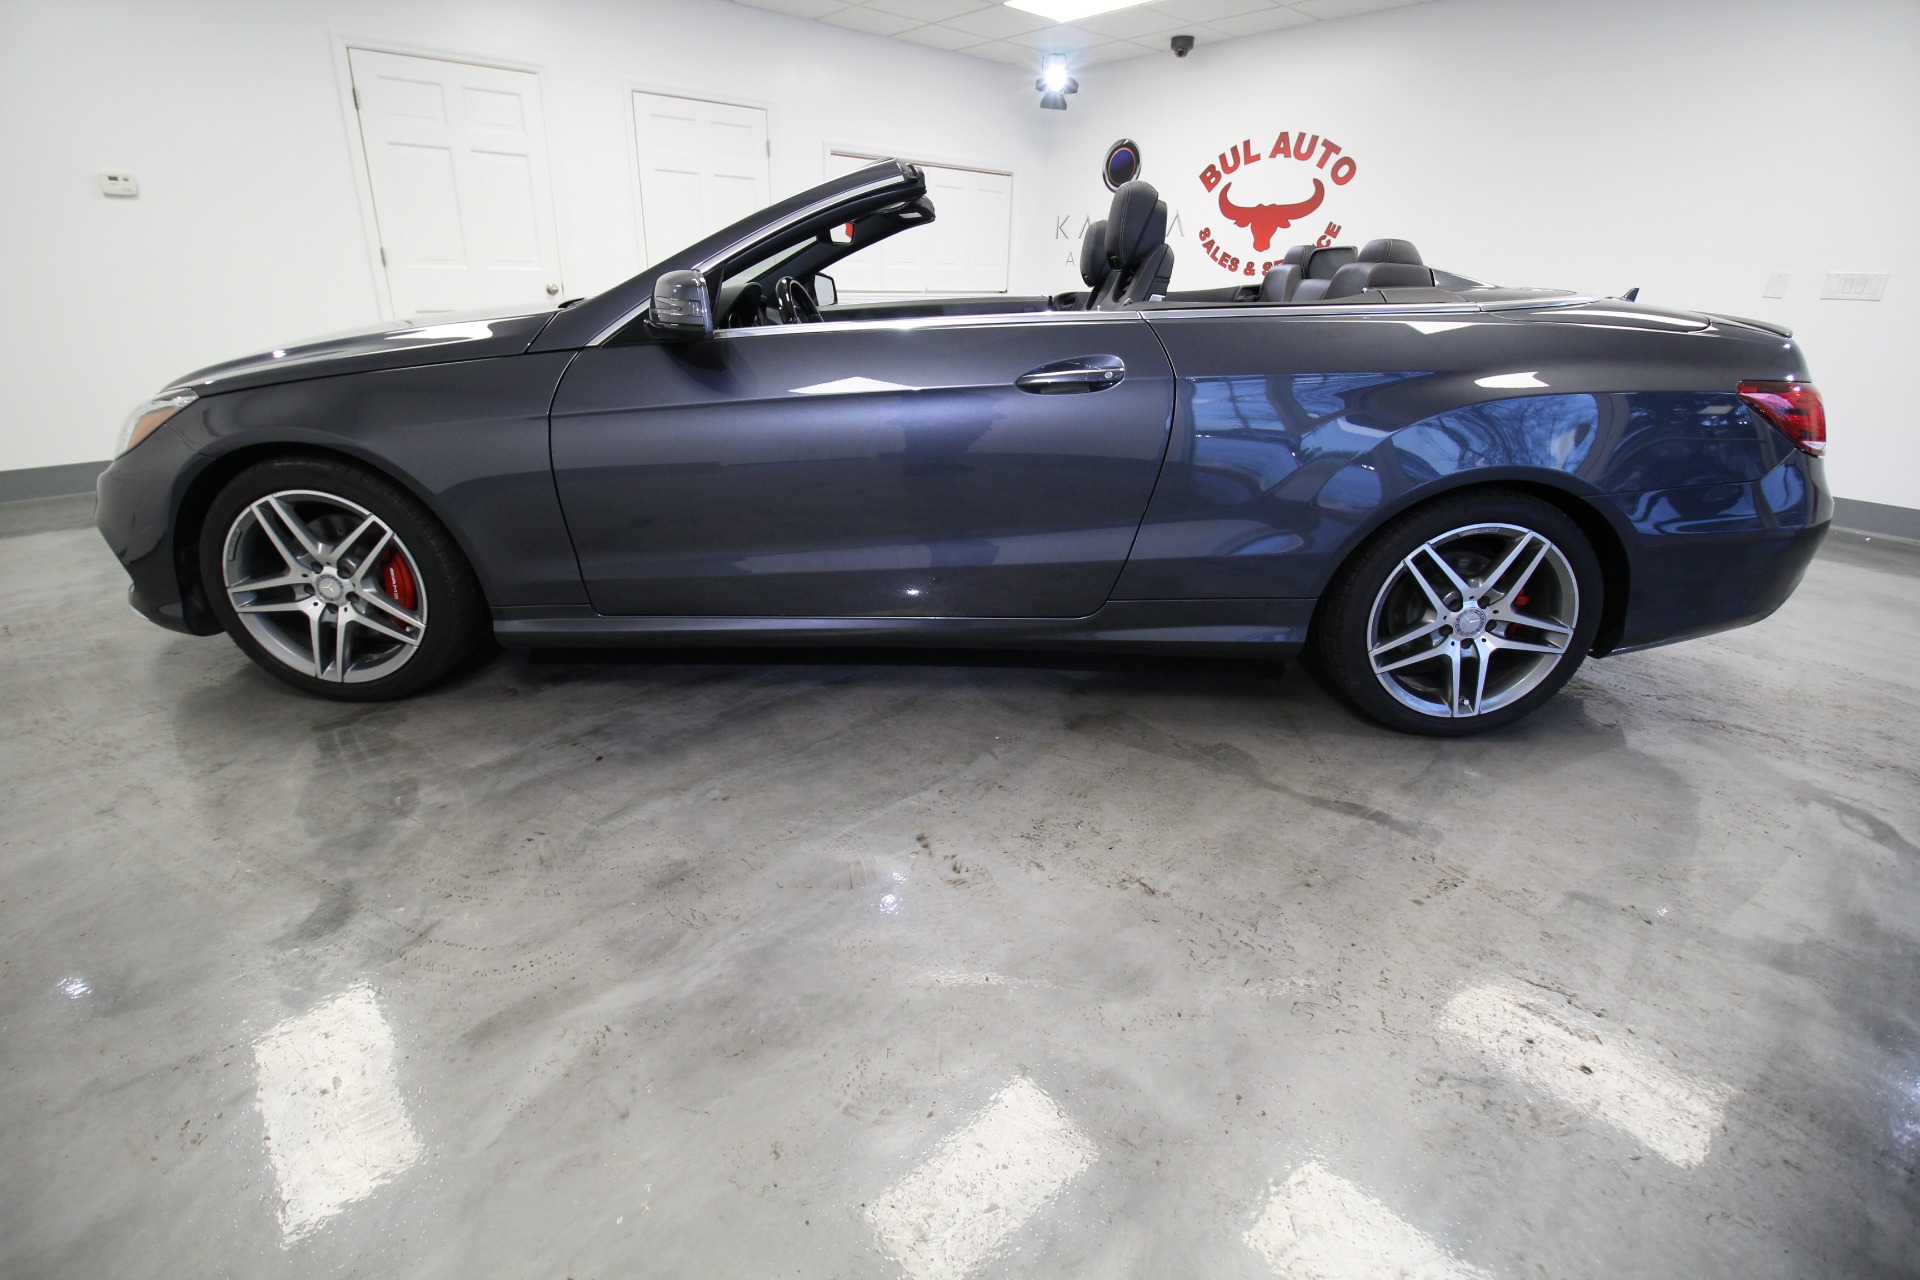 Used 2016 Steel Grey Metallic Mercedes-Benz E-Class E400 CABRIOLET CONVERTIBLE SUPERB INSIDE AND OUT LOW MILES | Albany, NY